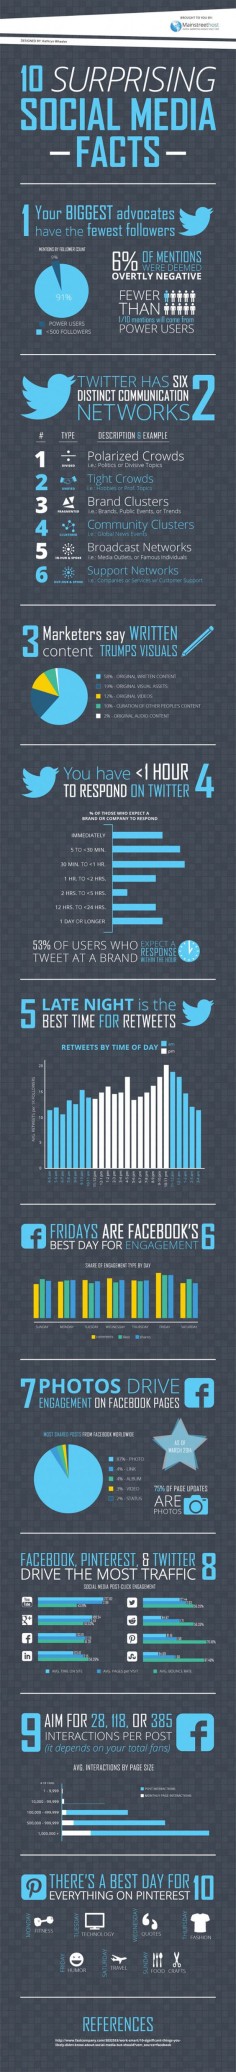 10 Surprising Things You Should Know About Social Media (Infographic)